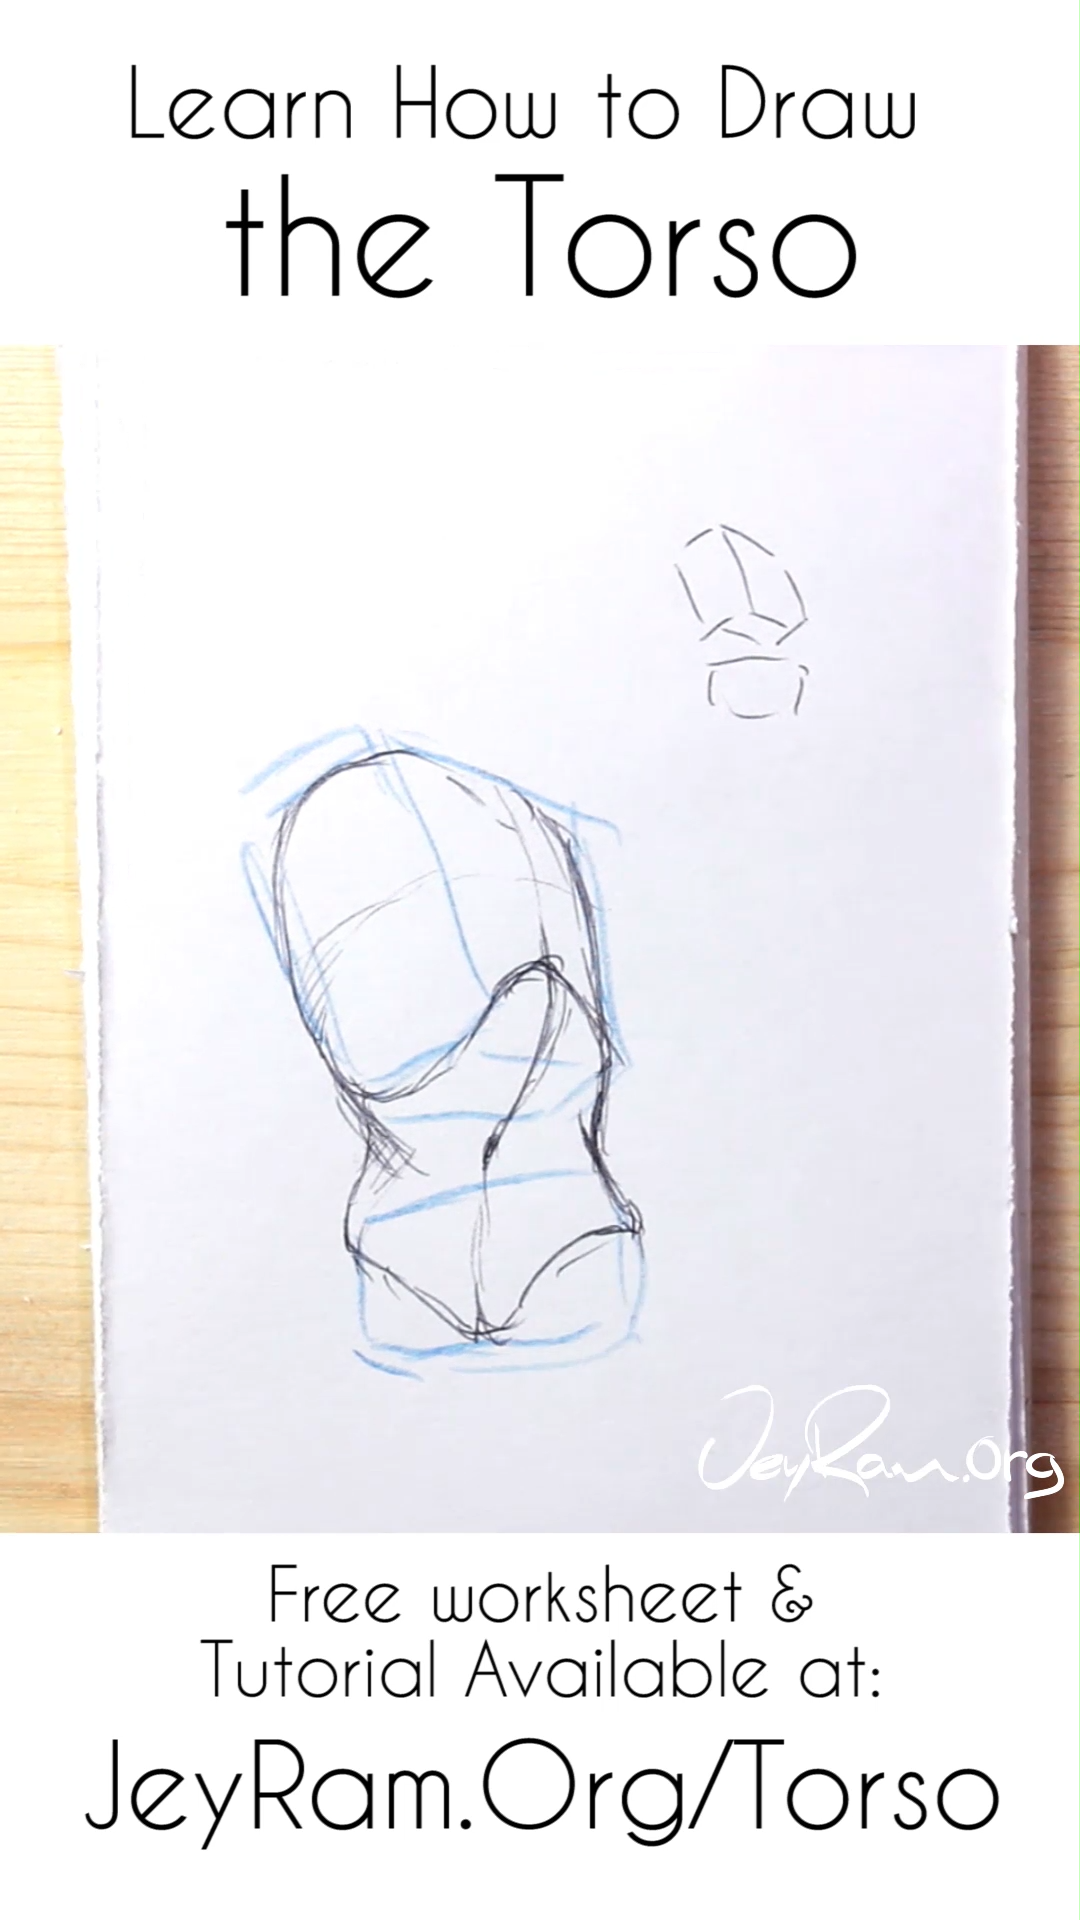 How to Draw the Torso: Free Worksheet & Tutorial - How to Draw the Torso: Free Worksheet & Tutorial -   12 drawing anime hairstyles ideas